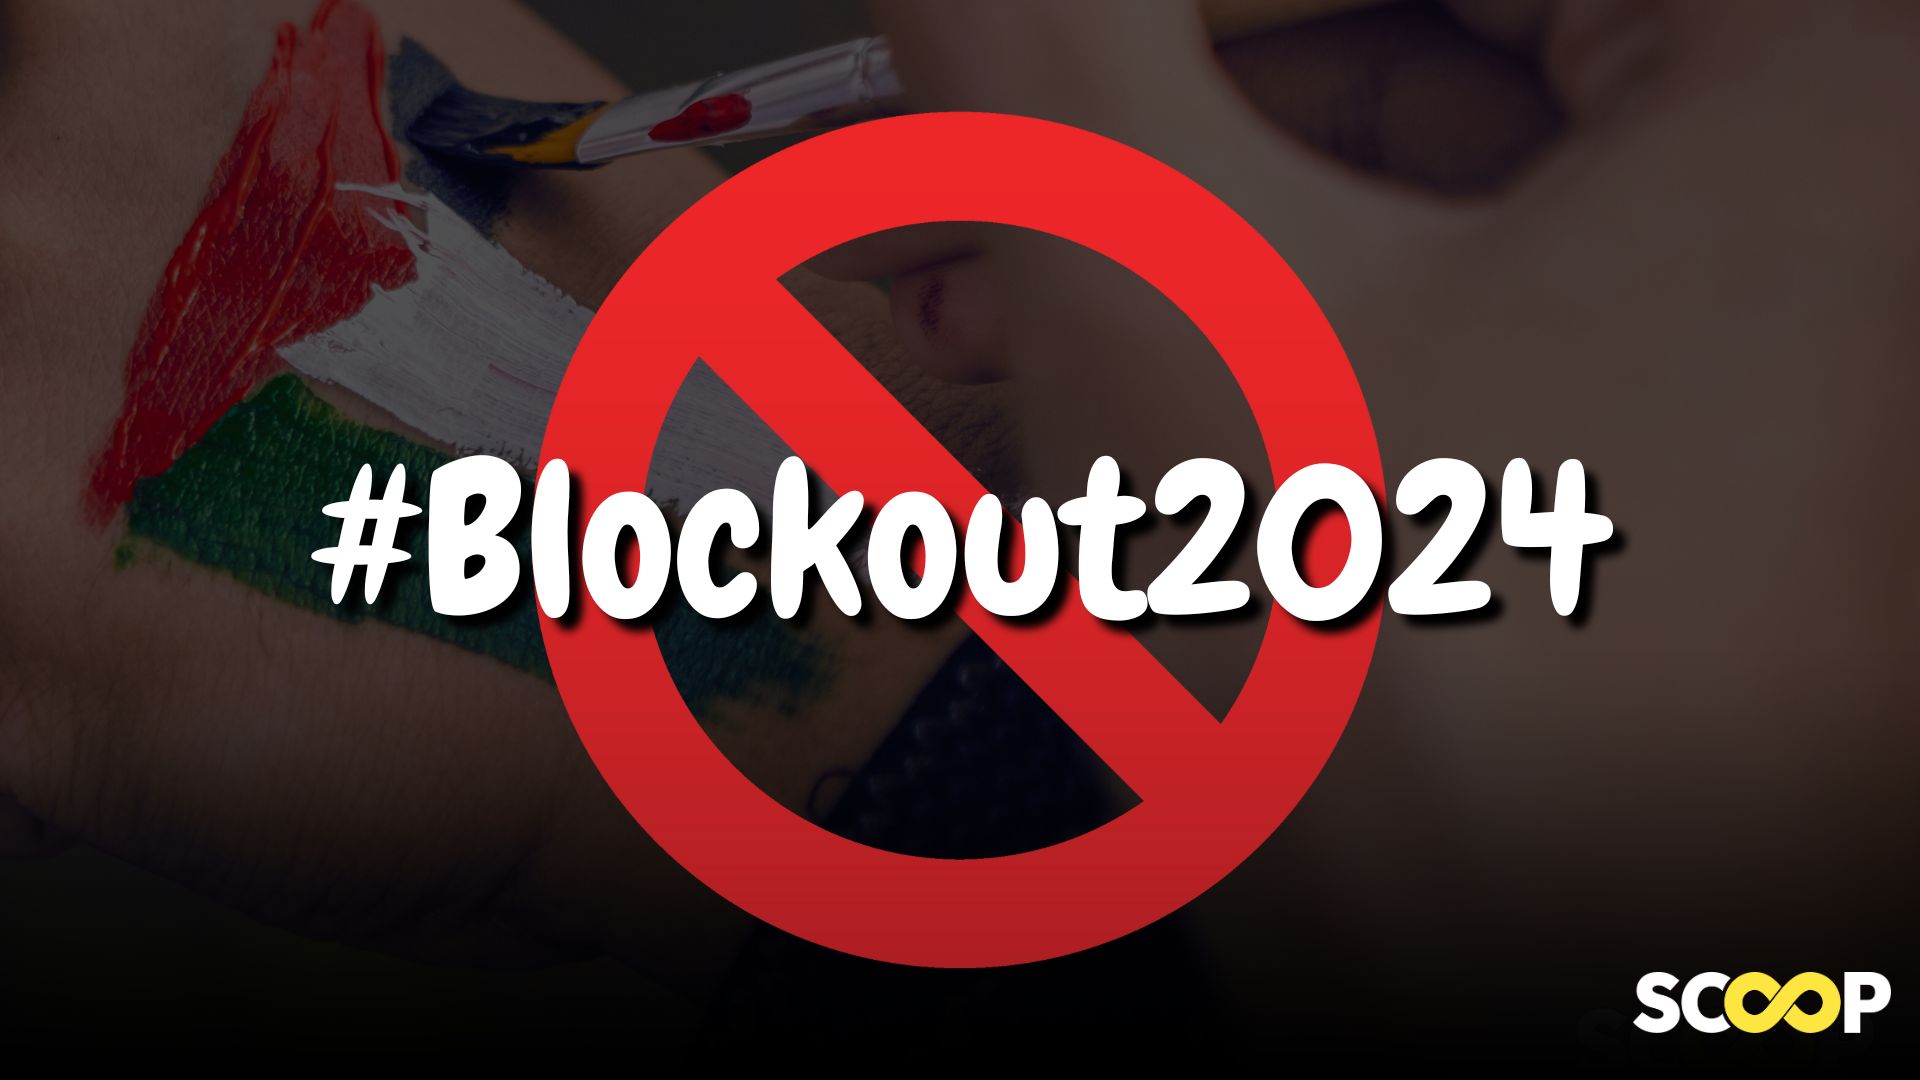 #Blockout2024: could a global call for Gaza also end celebrity worship?